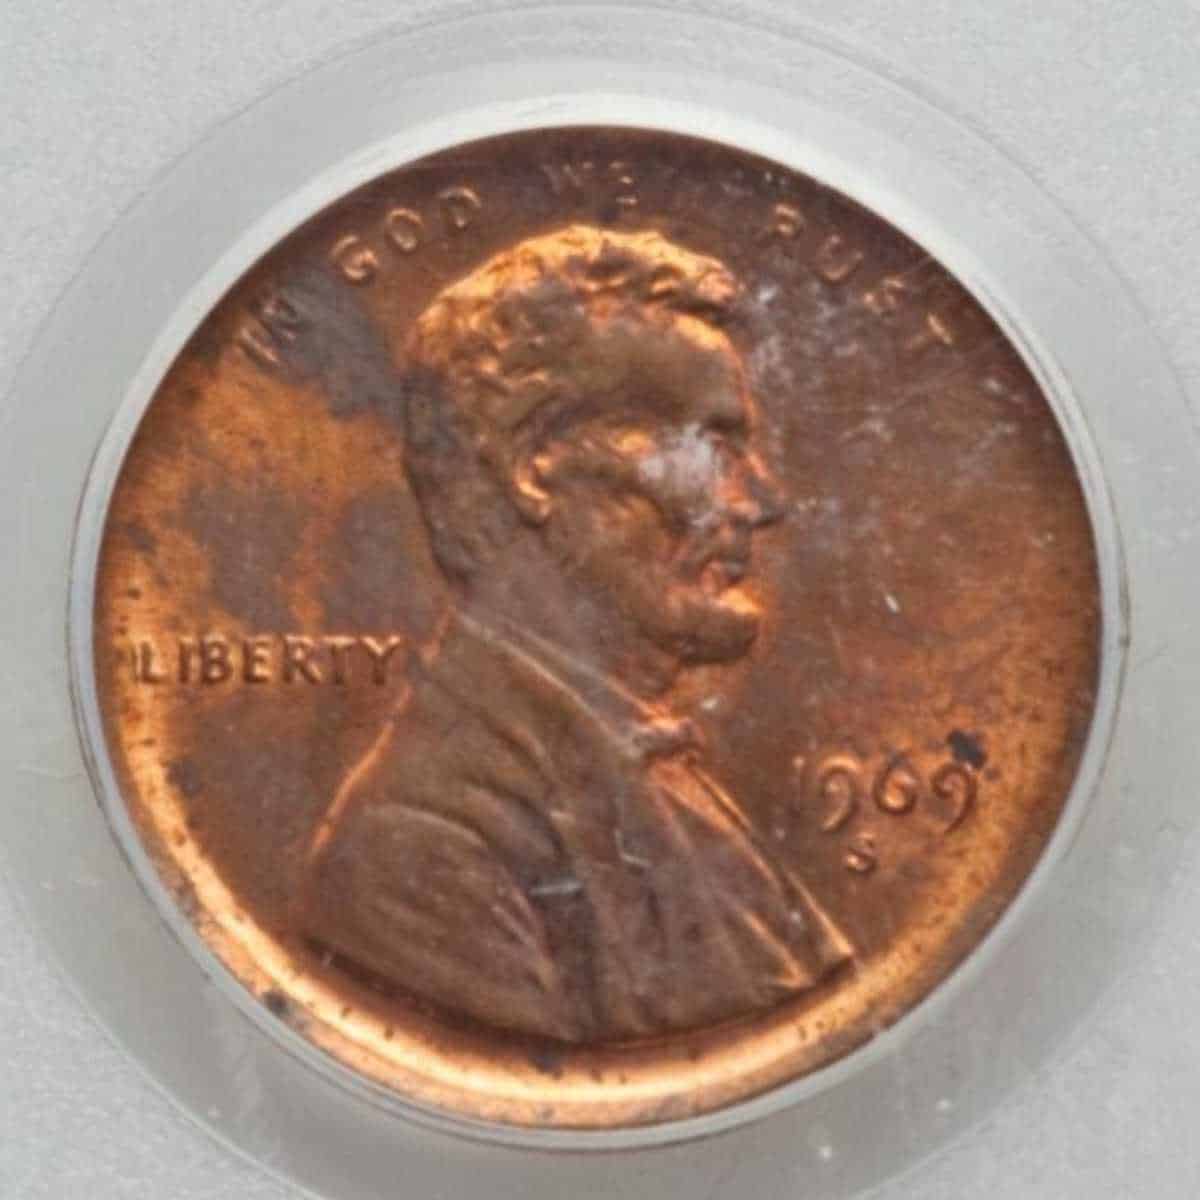 1969 S Penny with Broad struck, Out of Collar Error